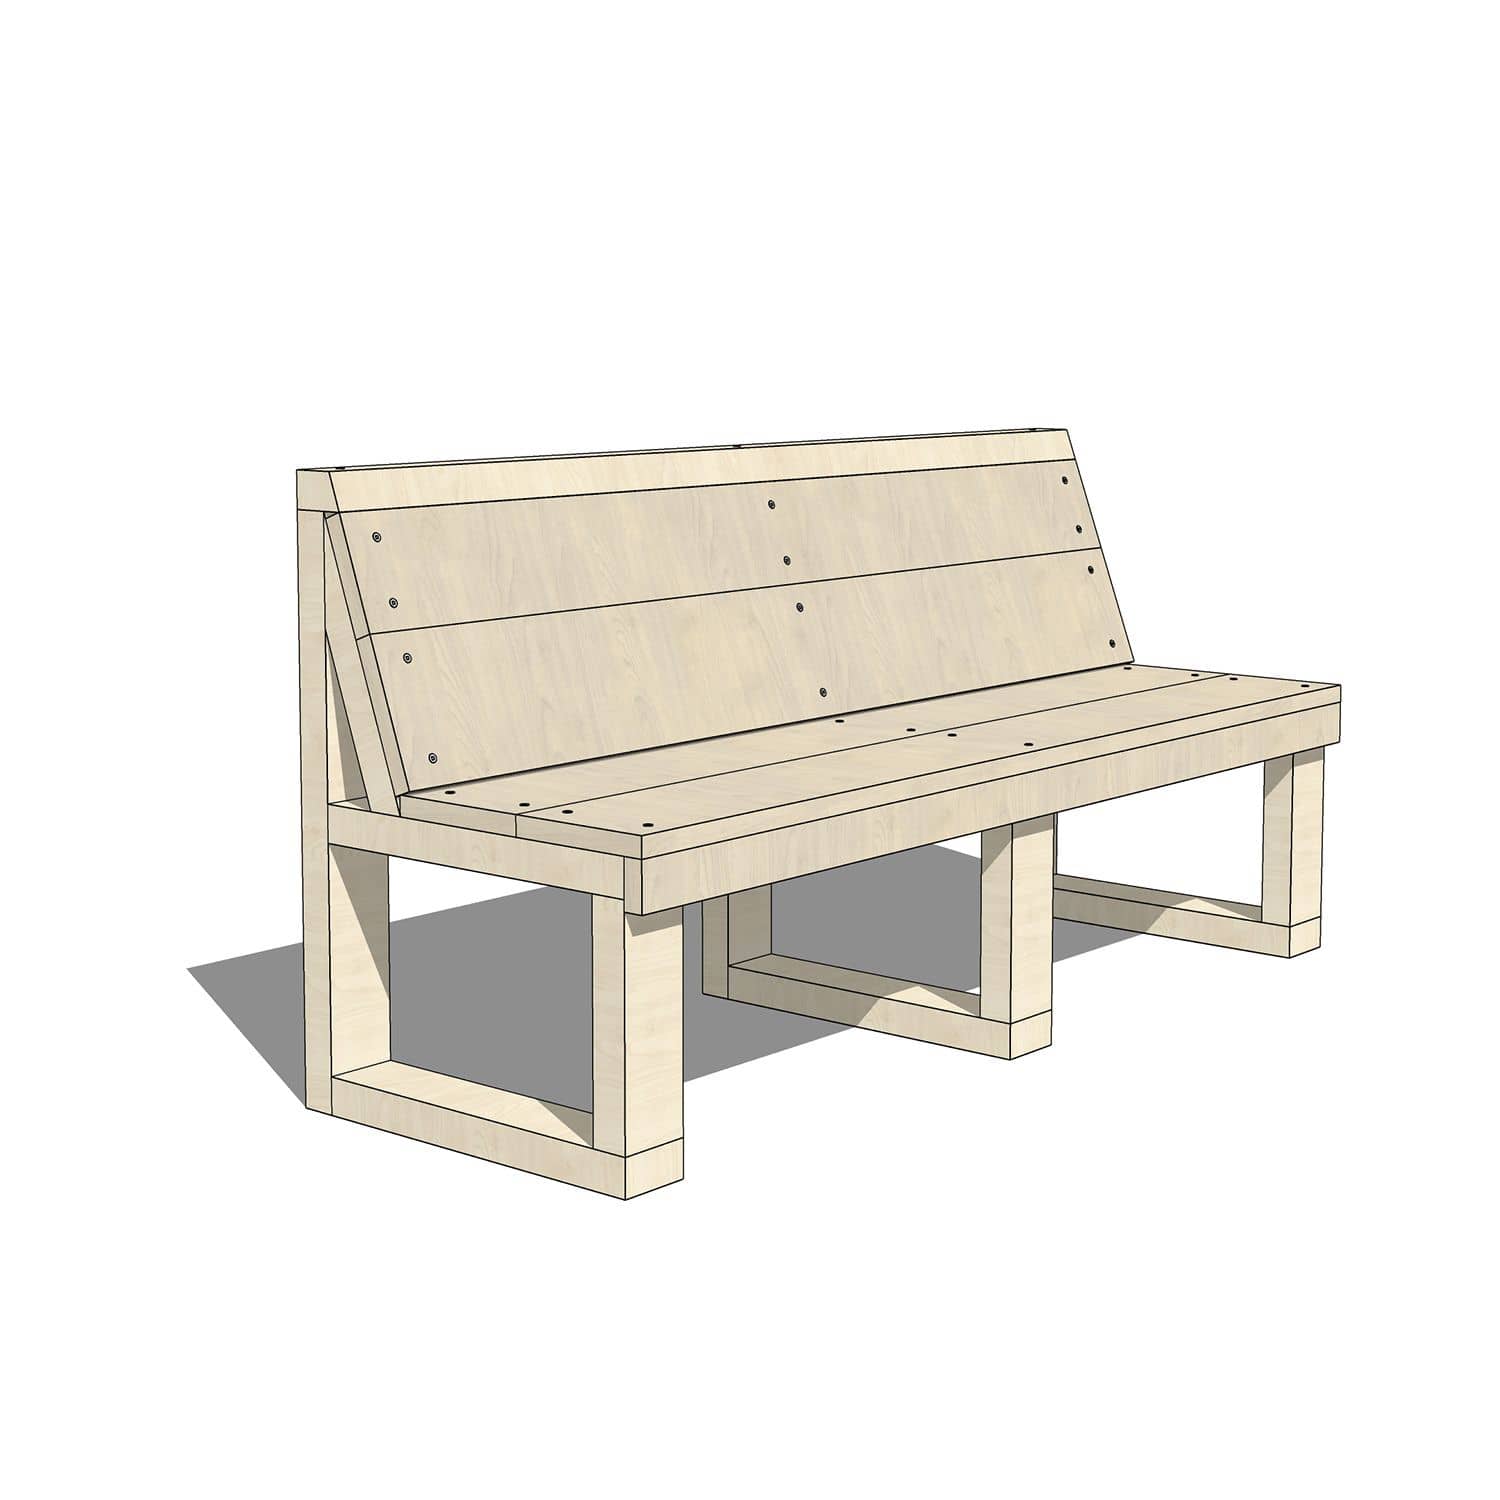 Wooden bench seat with sloped back